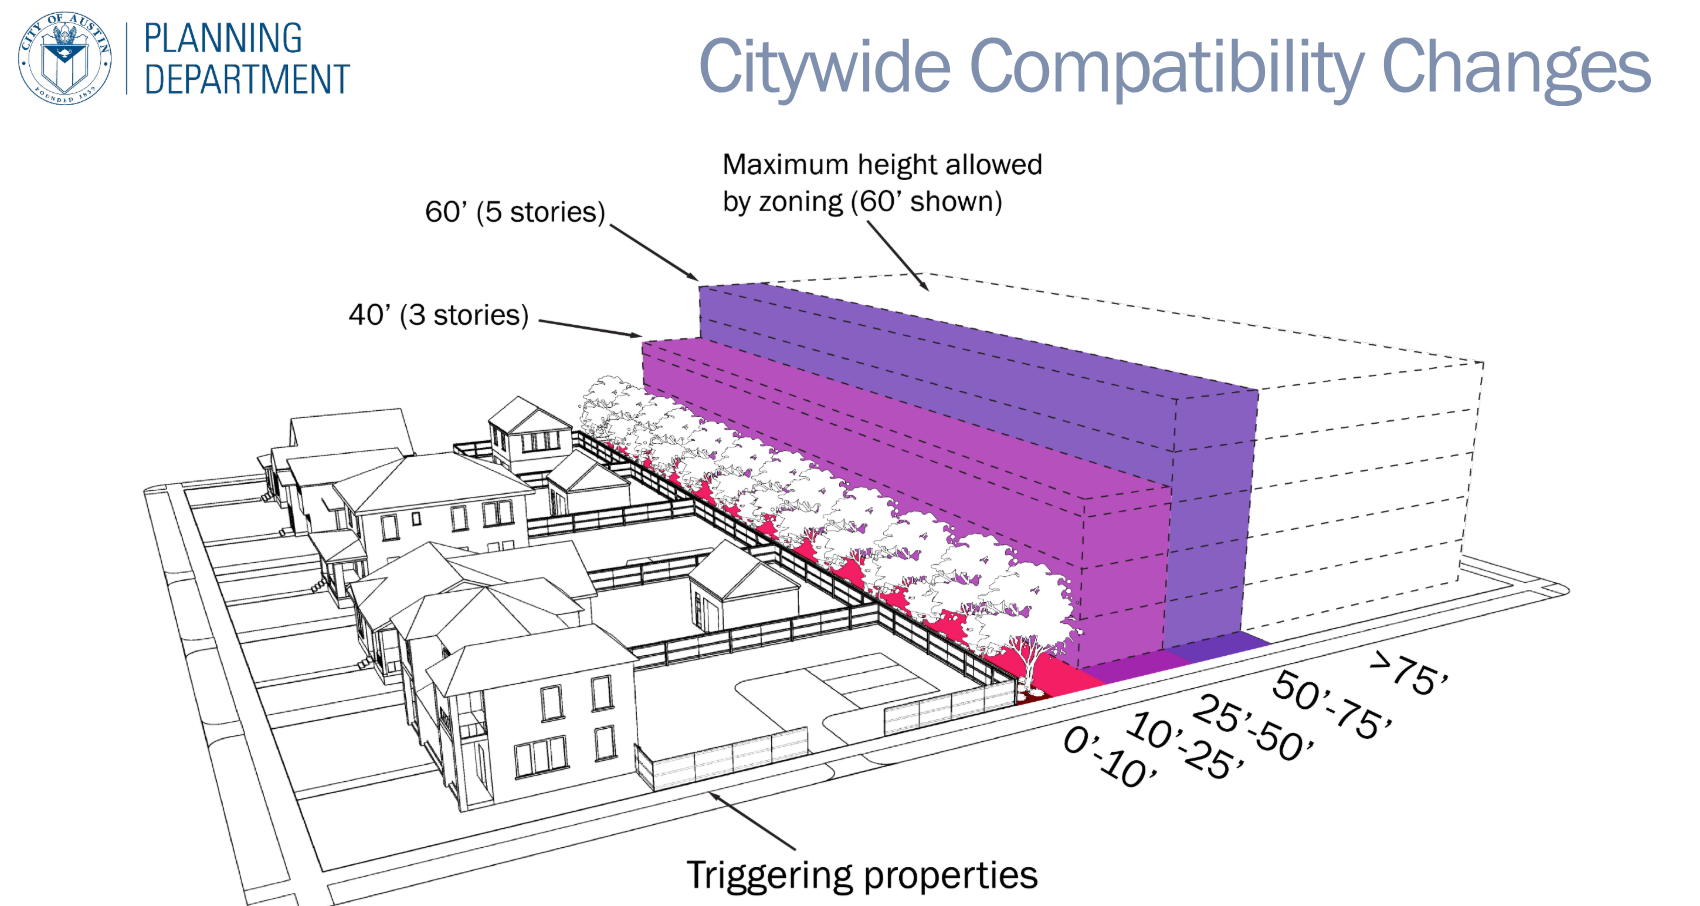 Diagram showing the proposed compatibility changes. Between 0-25 feet no building would be allowed. Between 25-50 feet only 40 feet (or 3 stories) would be allowed. Between 50-75 feet only 60 feet (or 5 stories) would be allowed. After 75 feet the building heigh would be determined by the maximum height allowed by the lands base zoning, however the diagram shows a building that is only 60 feet tall.  